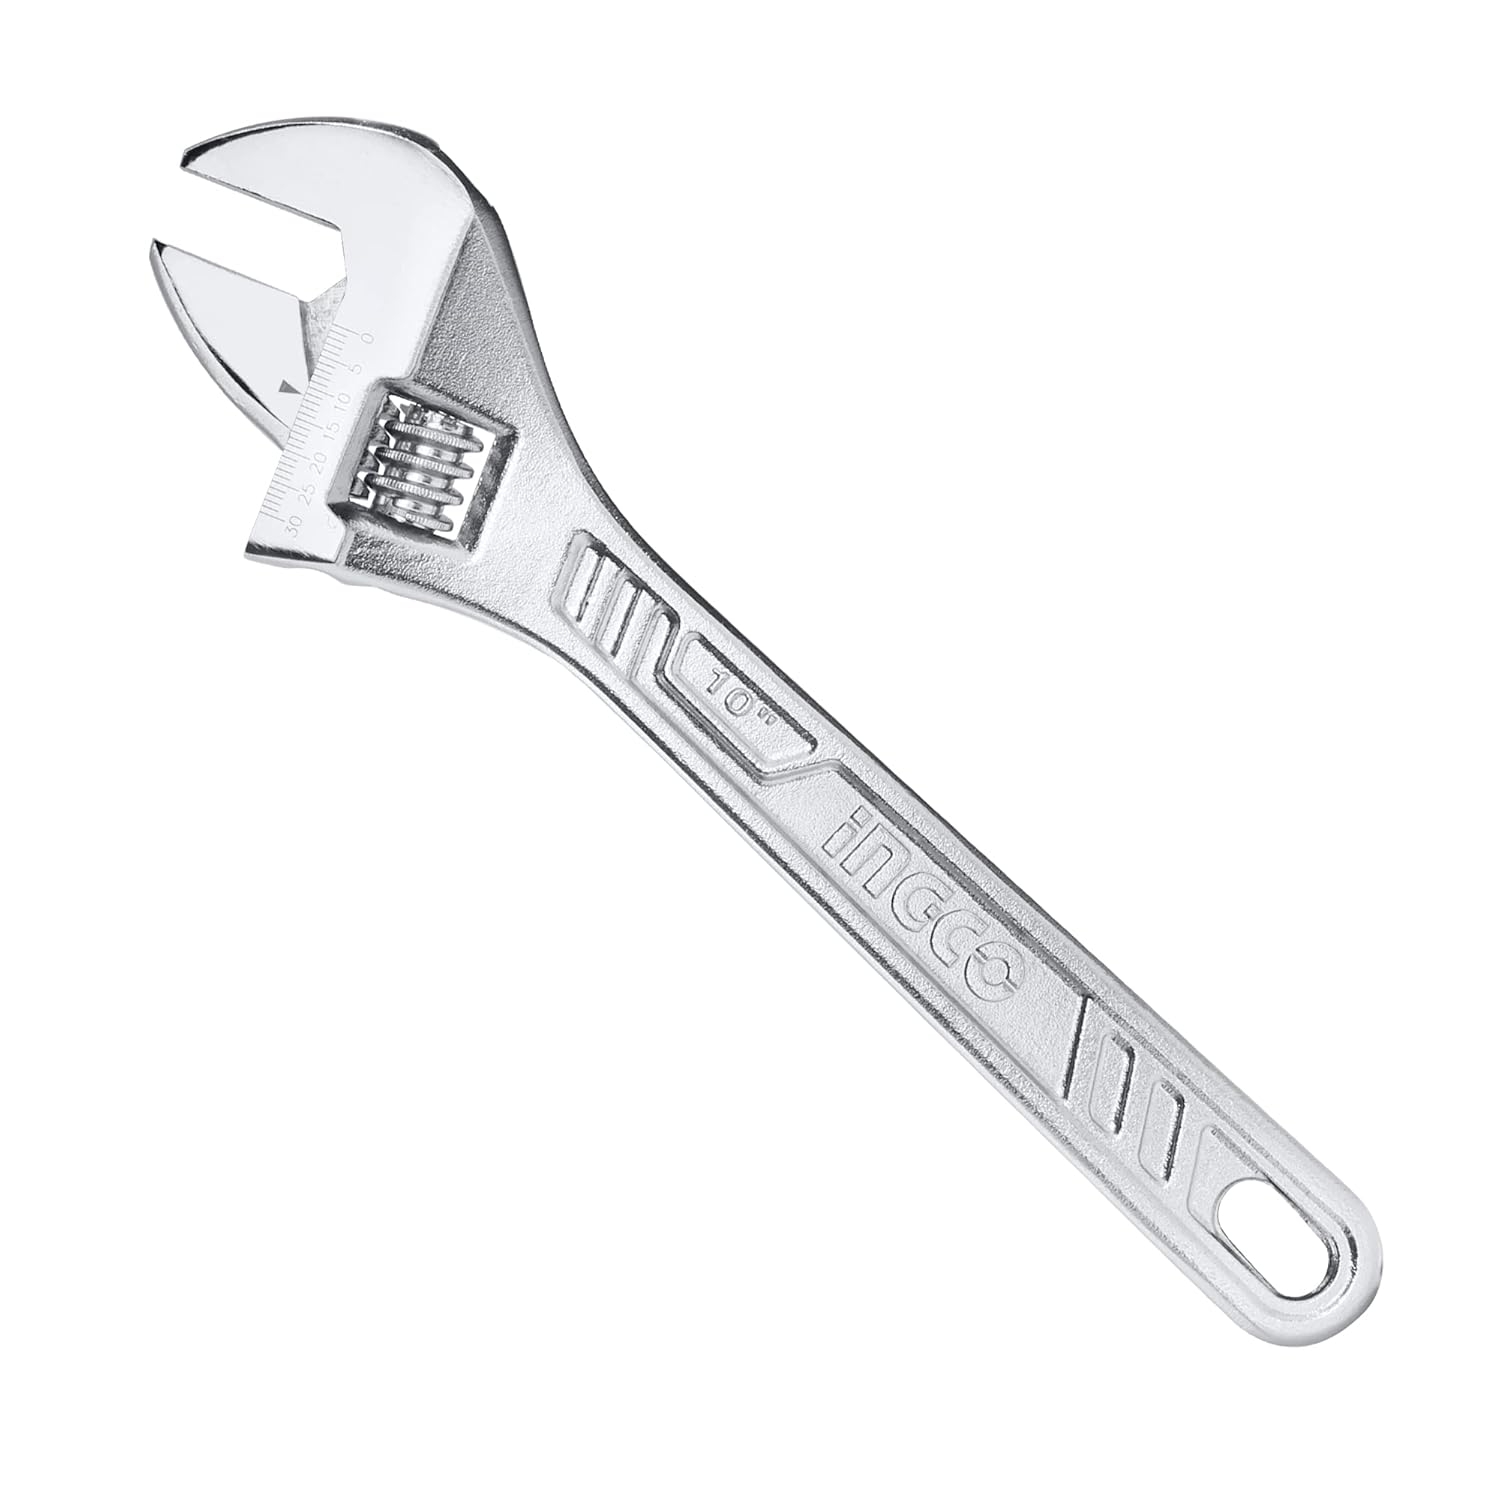 Ingco Adjustable Wrench, 0-30mm | Metric Scale | 250mm(10") | C45, Drop-forged, Chrome-Plated, Professional Adjustable Wrench